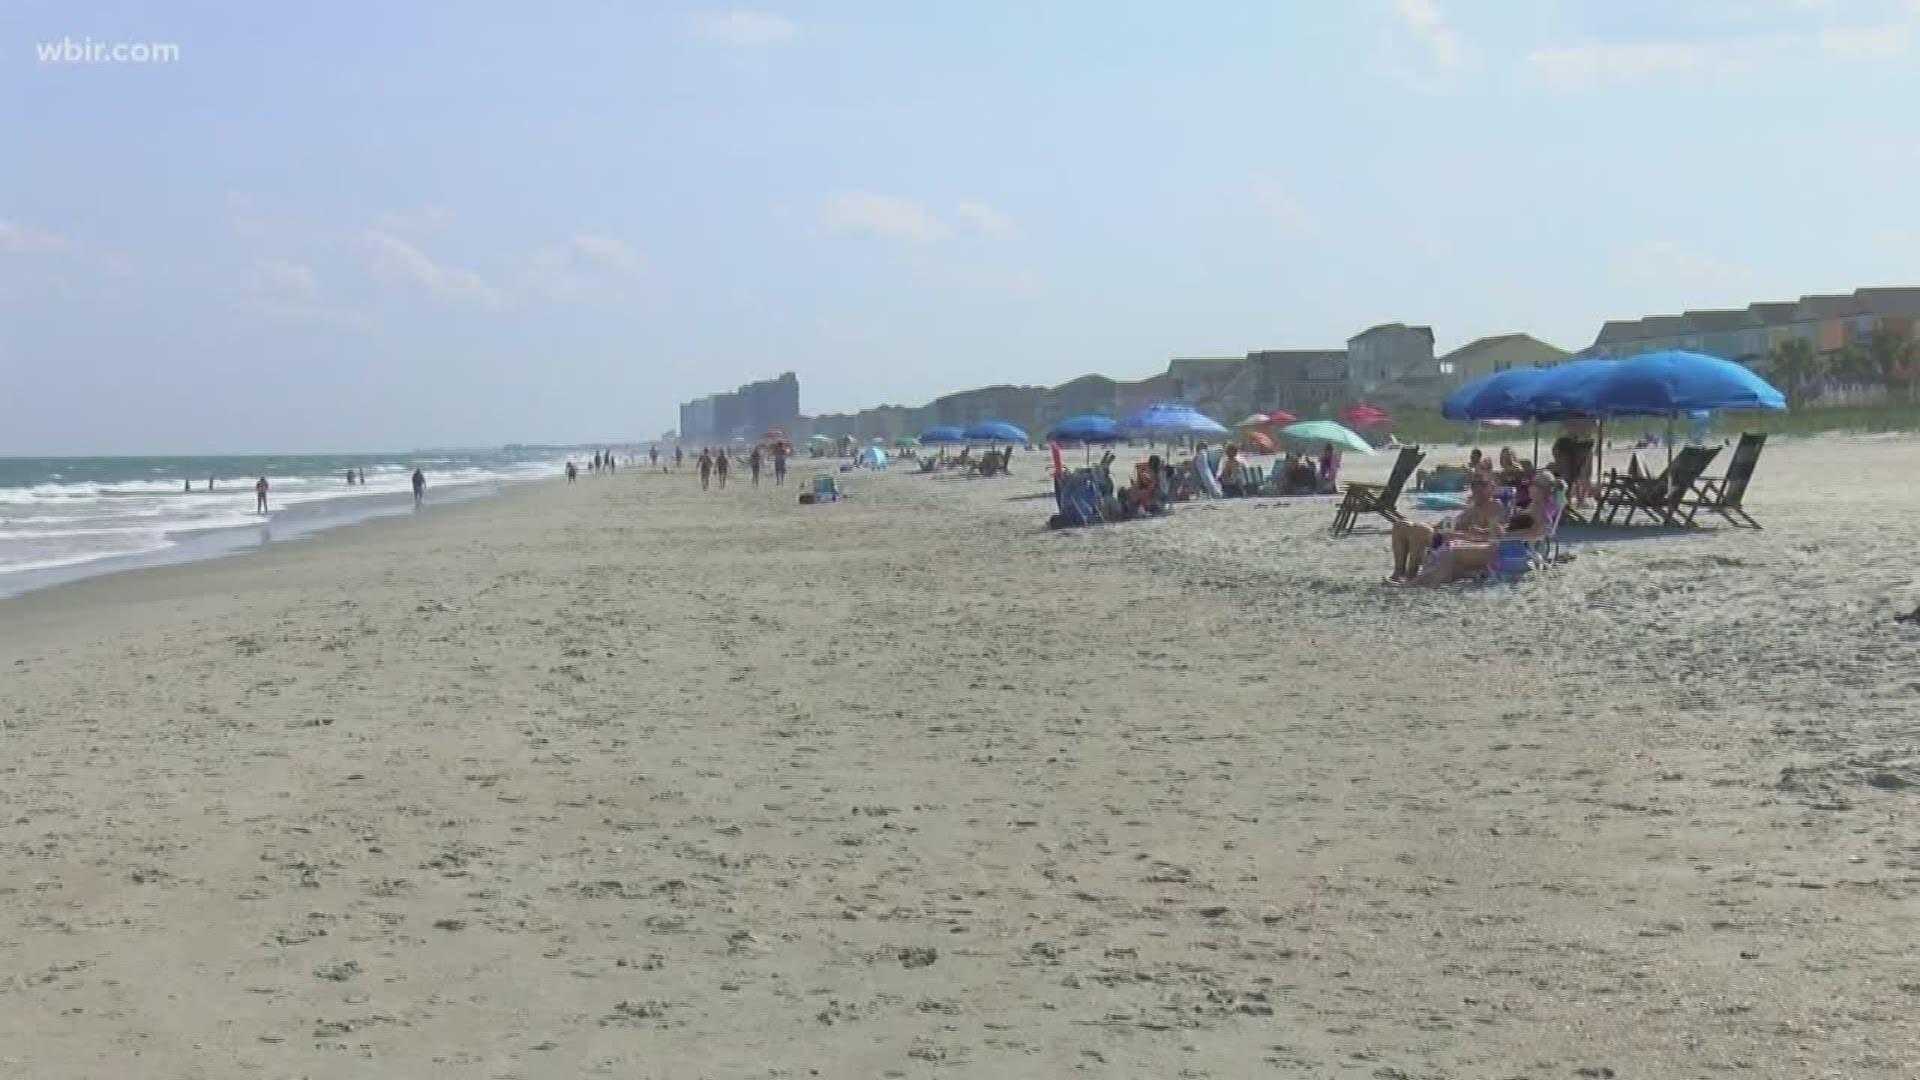 In Surfside Beach, South Carolina - anyone who doesn't fill up holes they dig at the beach could face a $130 fine. Plus, more than a quarter of Americans are "zombie drivers," and new research shows people who make their beds every morning are more productive.